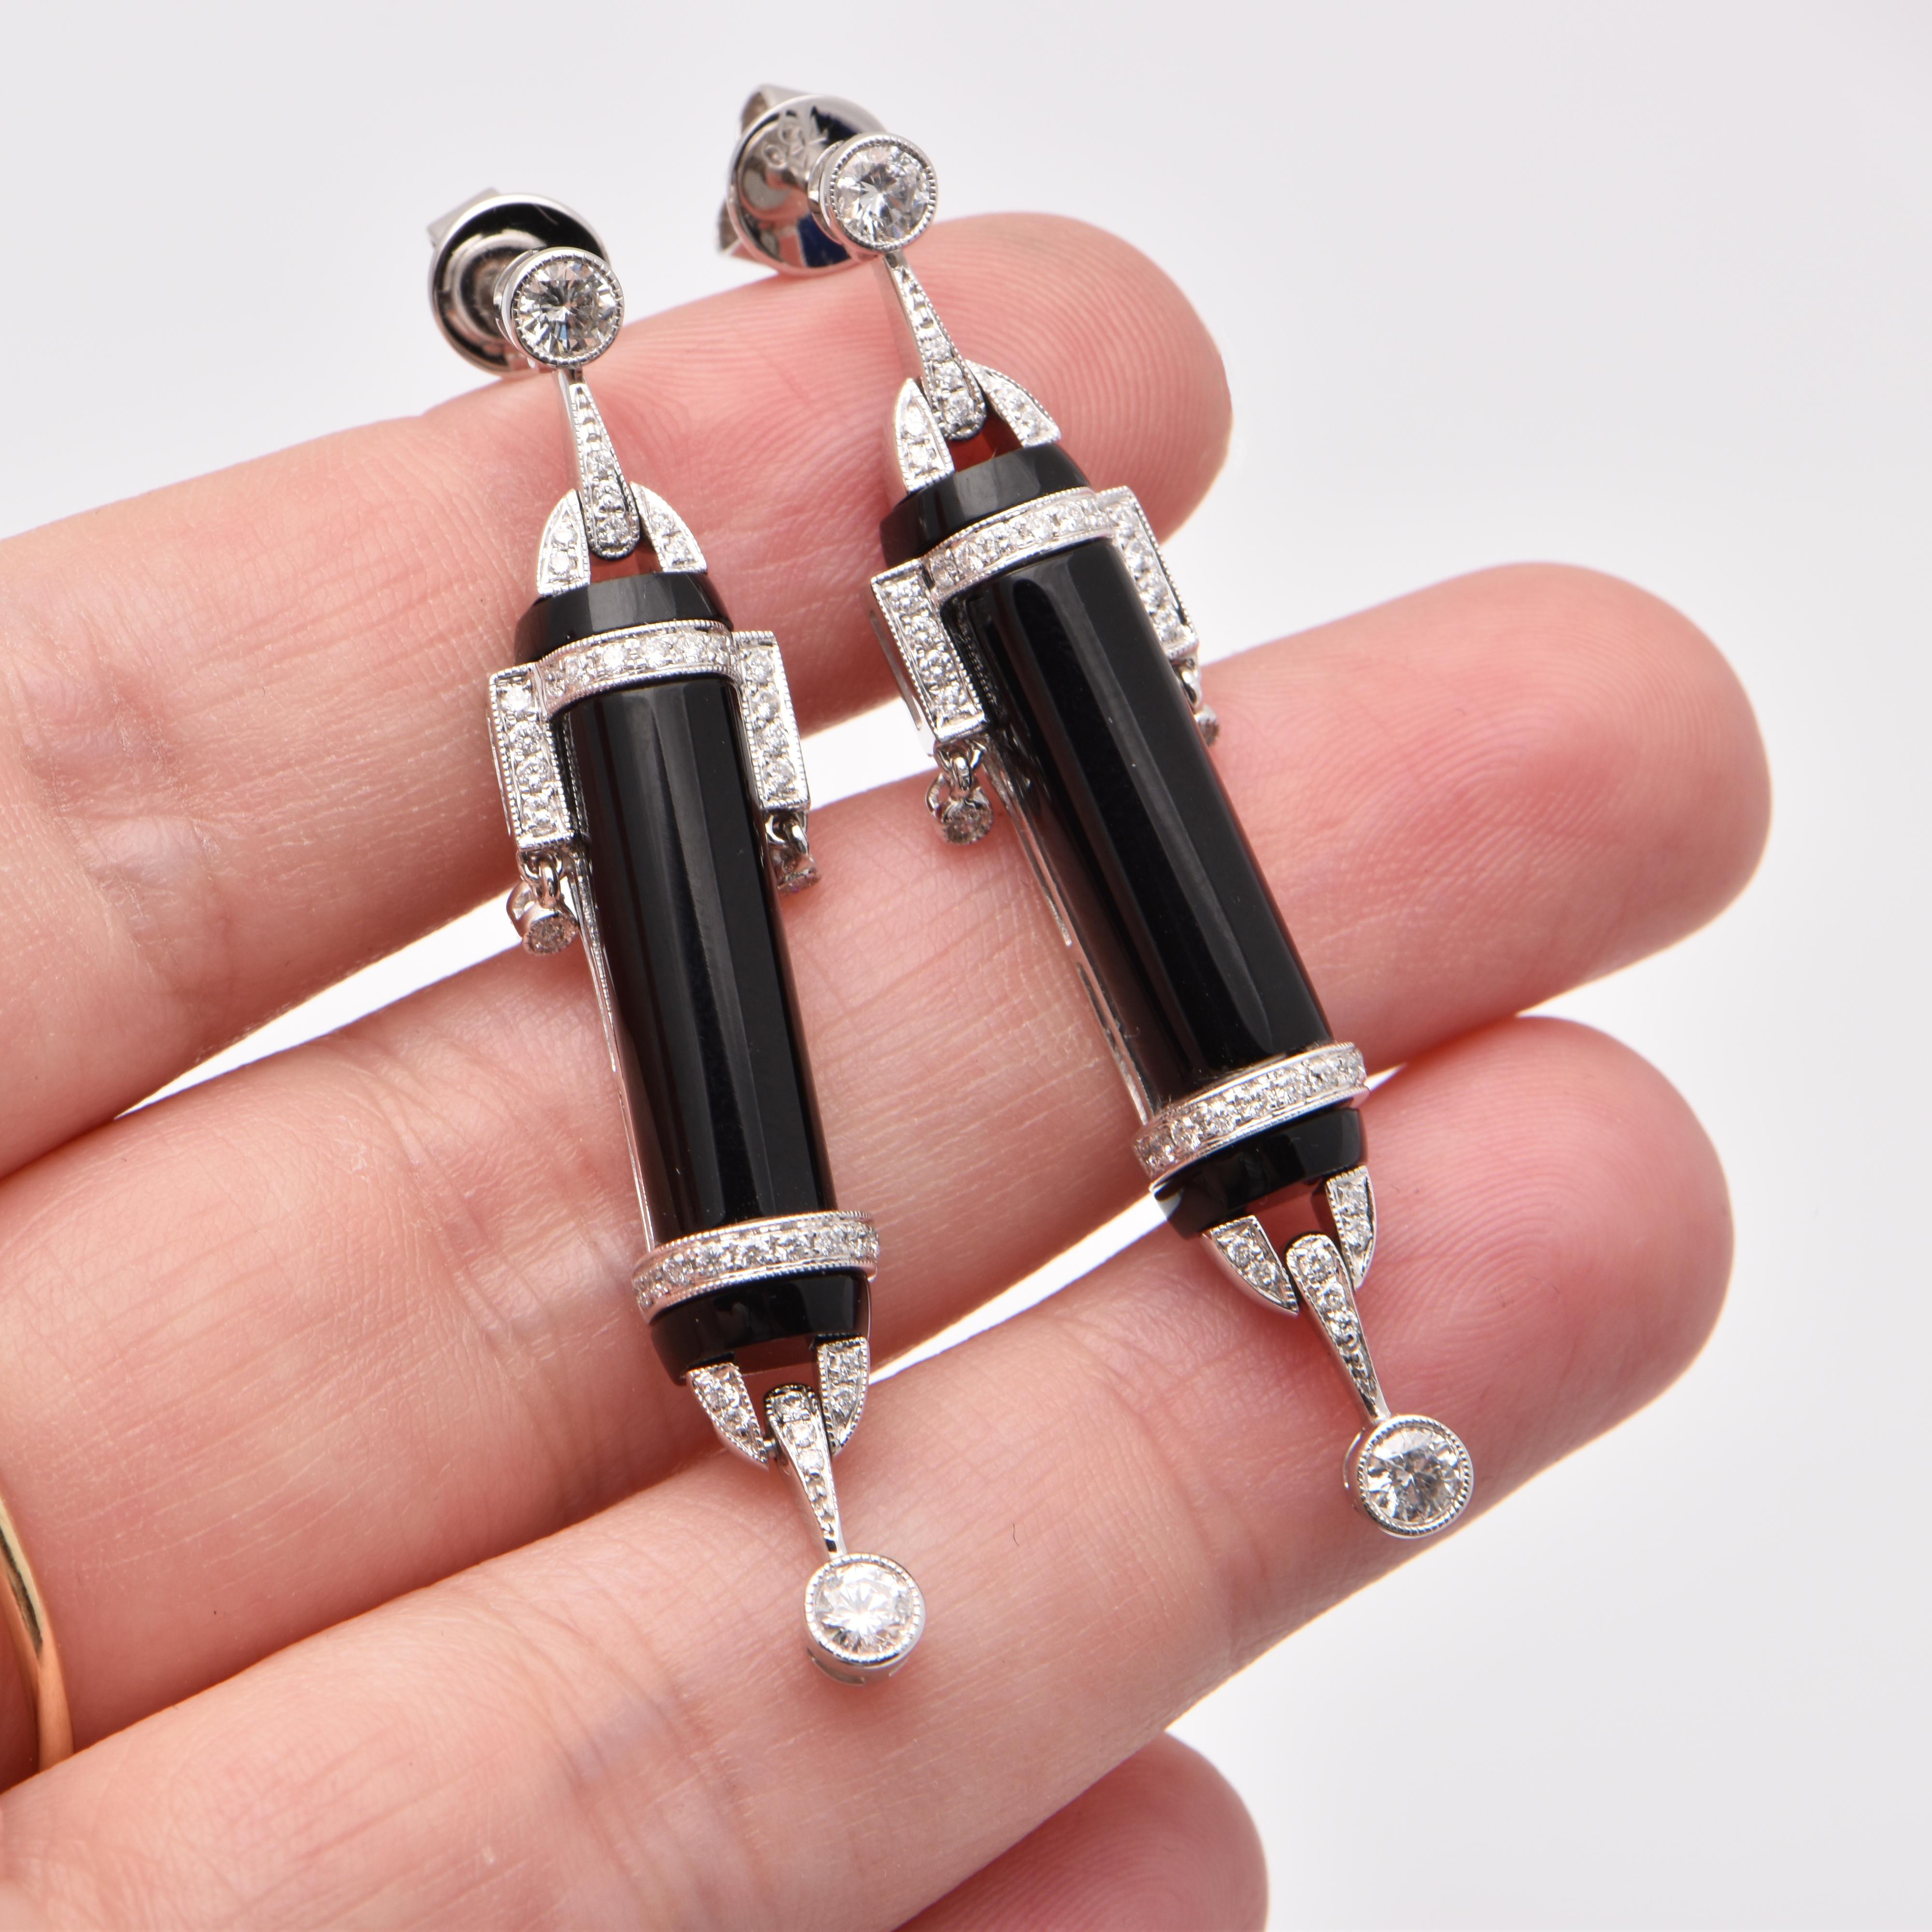 Art Deco Style 1 Carat Diamond and Onyx Earrings in 18 Carat White Gold For Sale 3